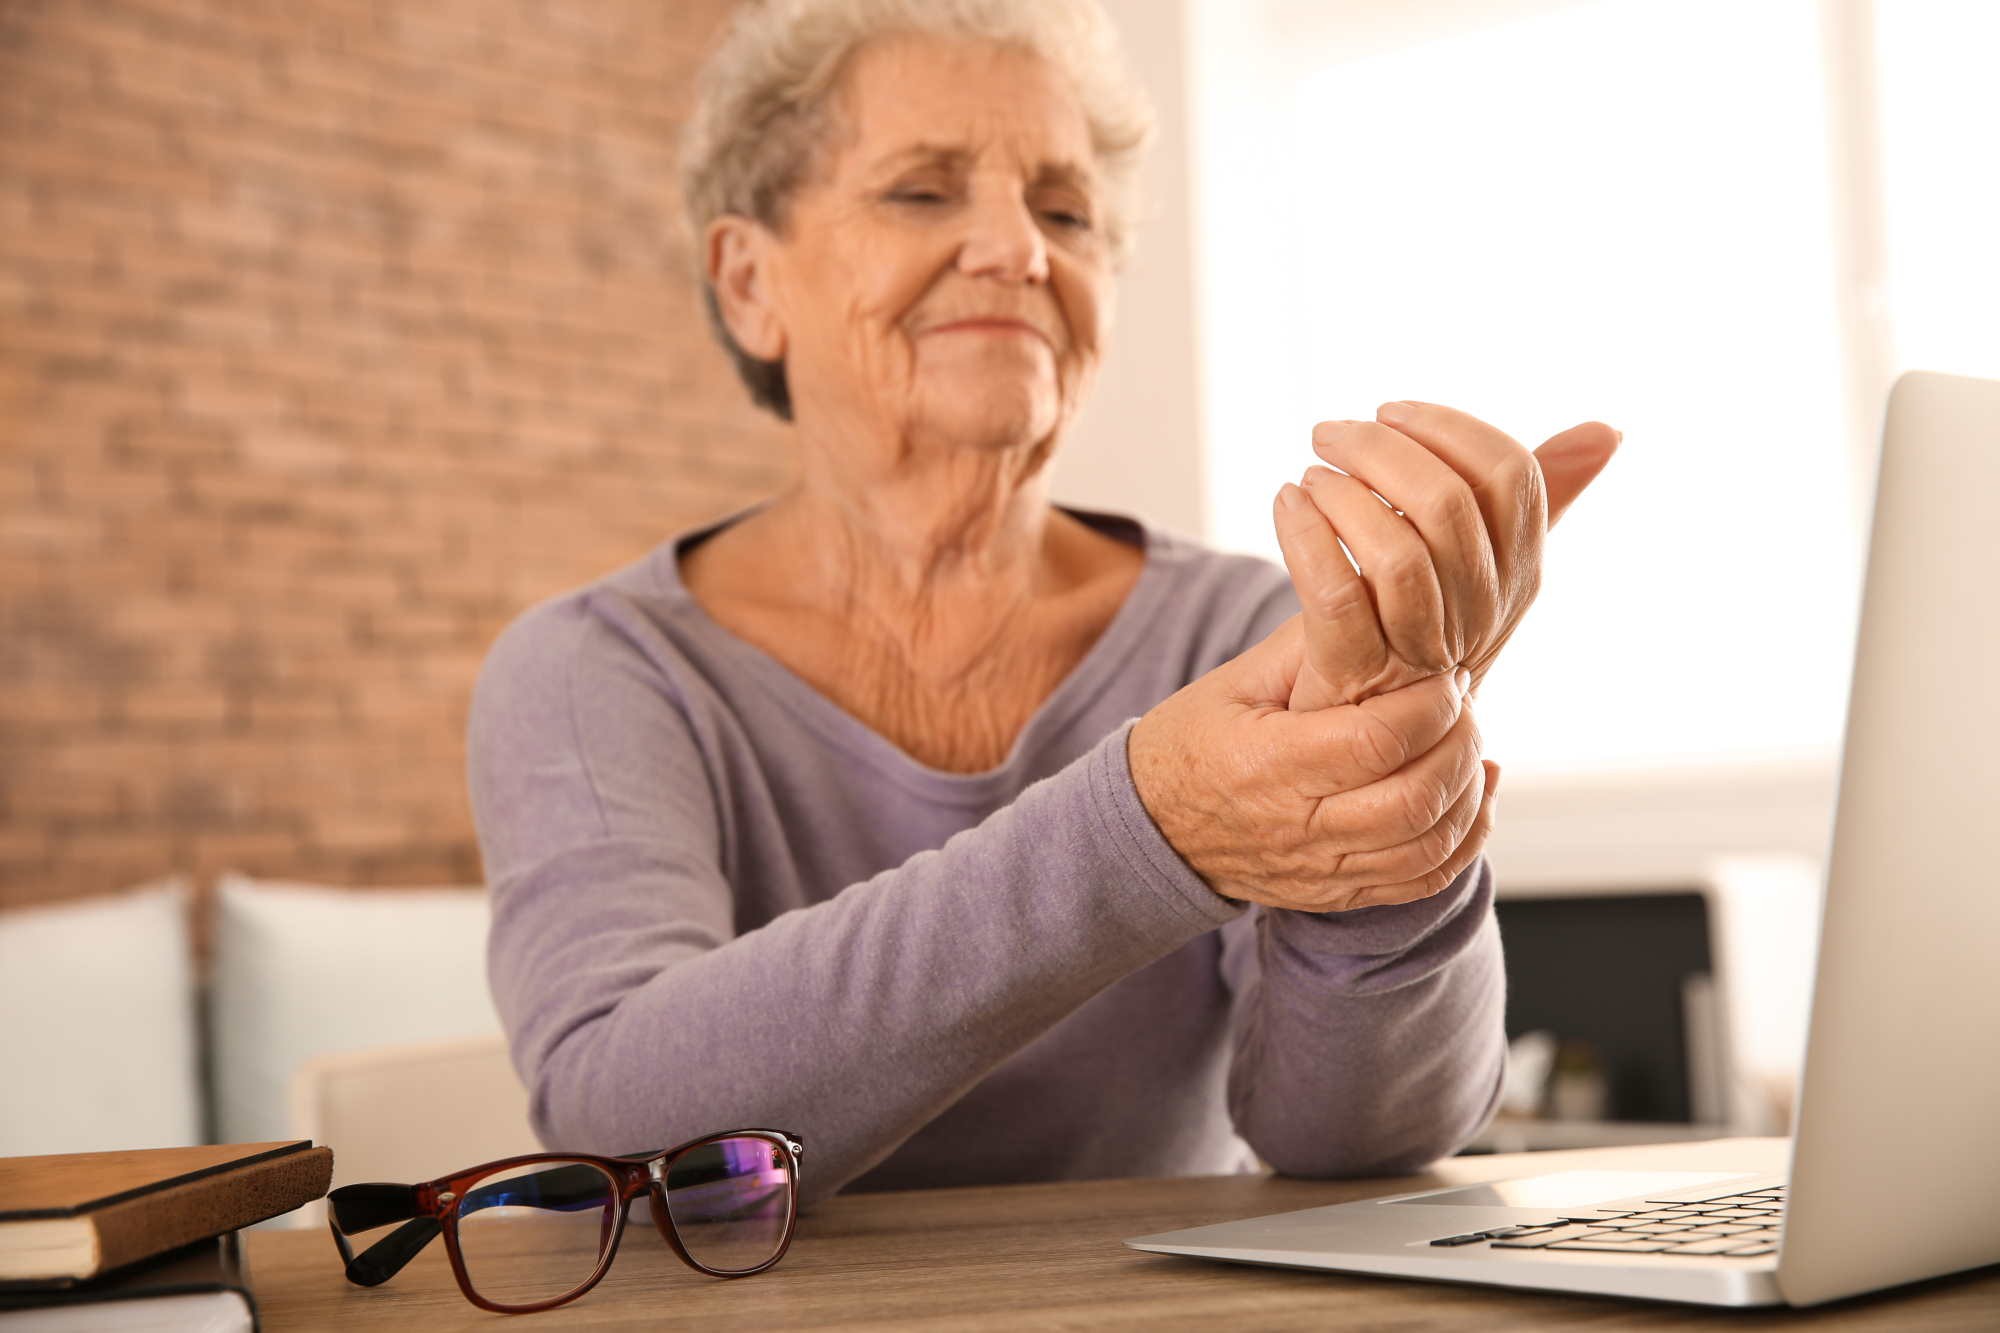 Eight ways to move and live better with arthritis